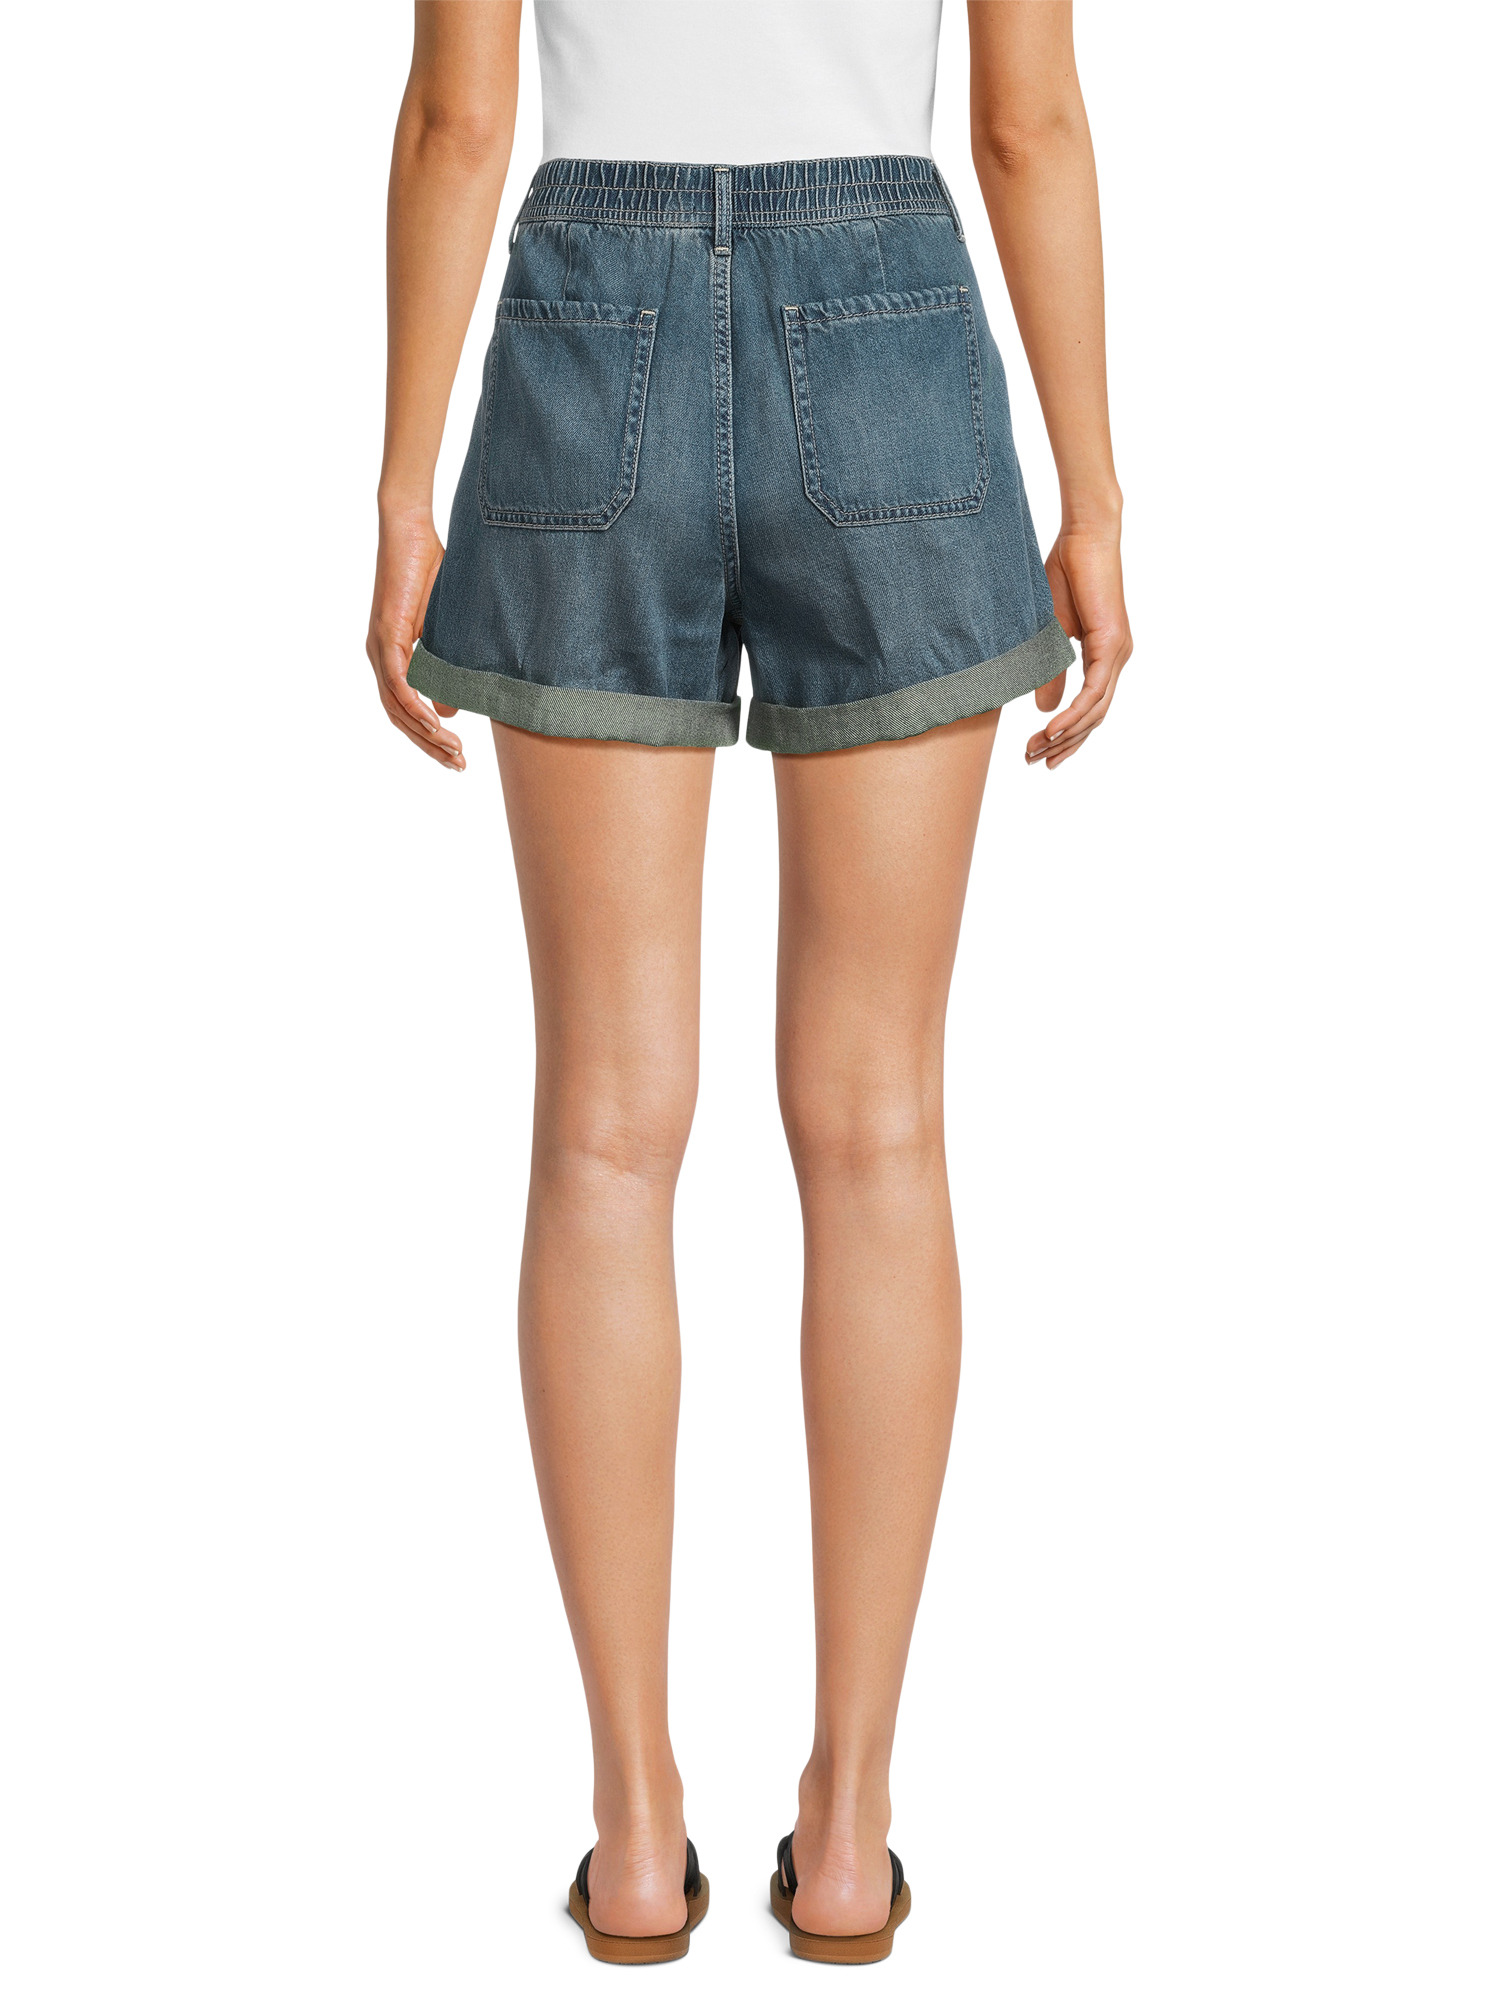 Time and Tru Women's and Women's Plus Utility Cuff Shorts, 4" Inseam, Sizes 2-20 - image 3 of 5